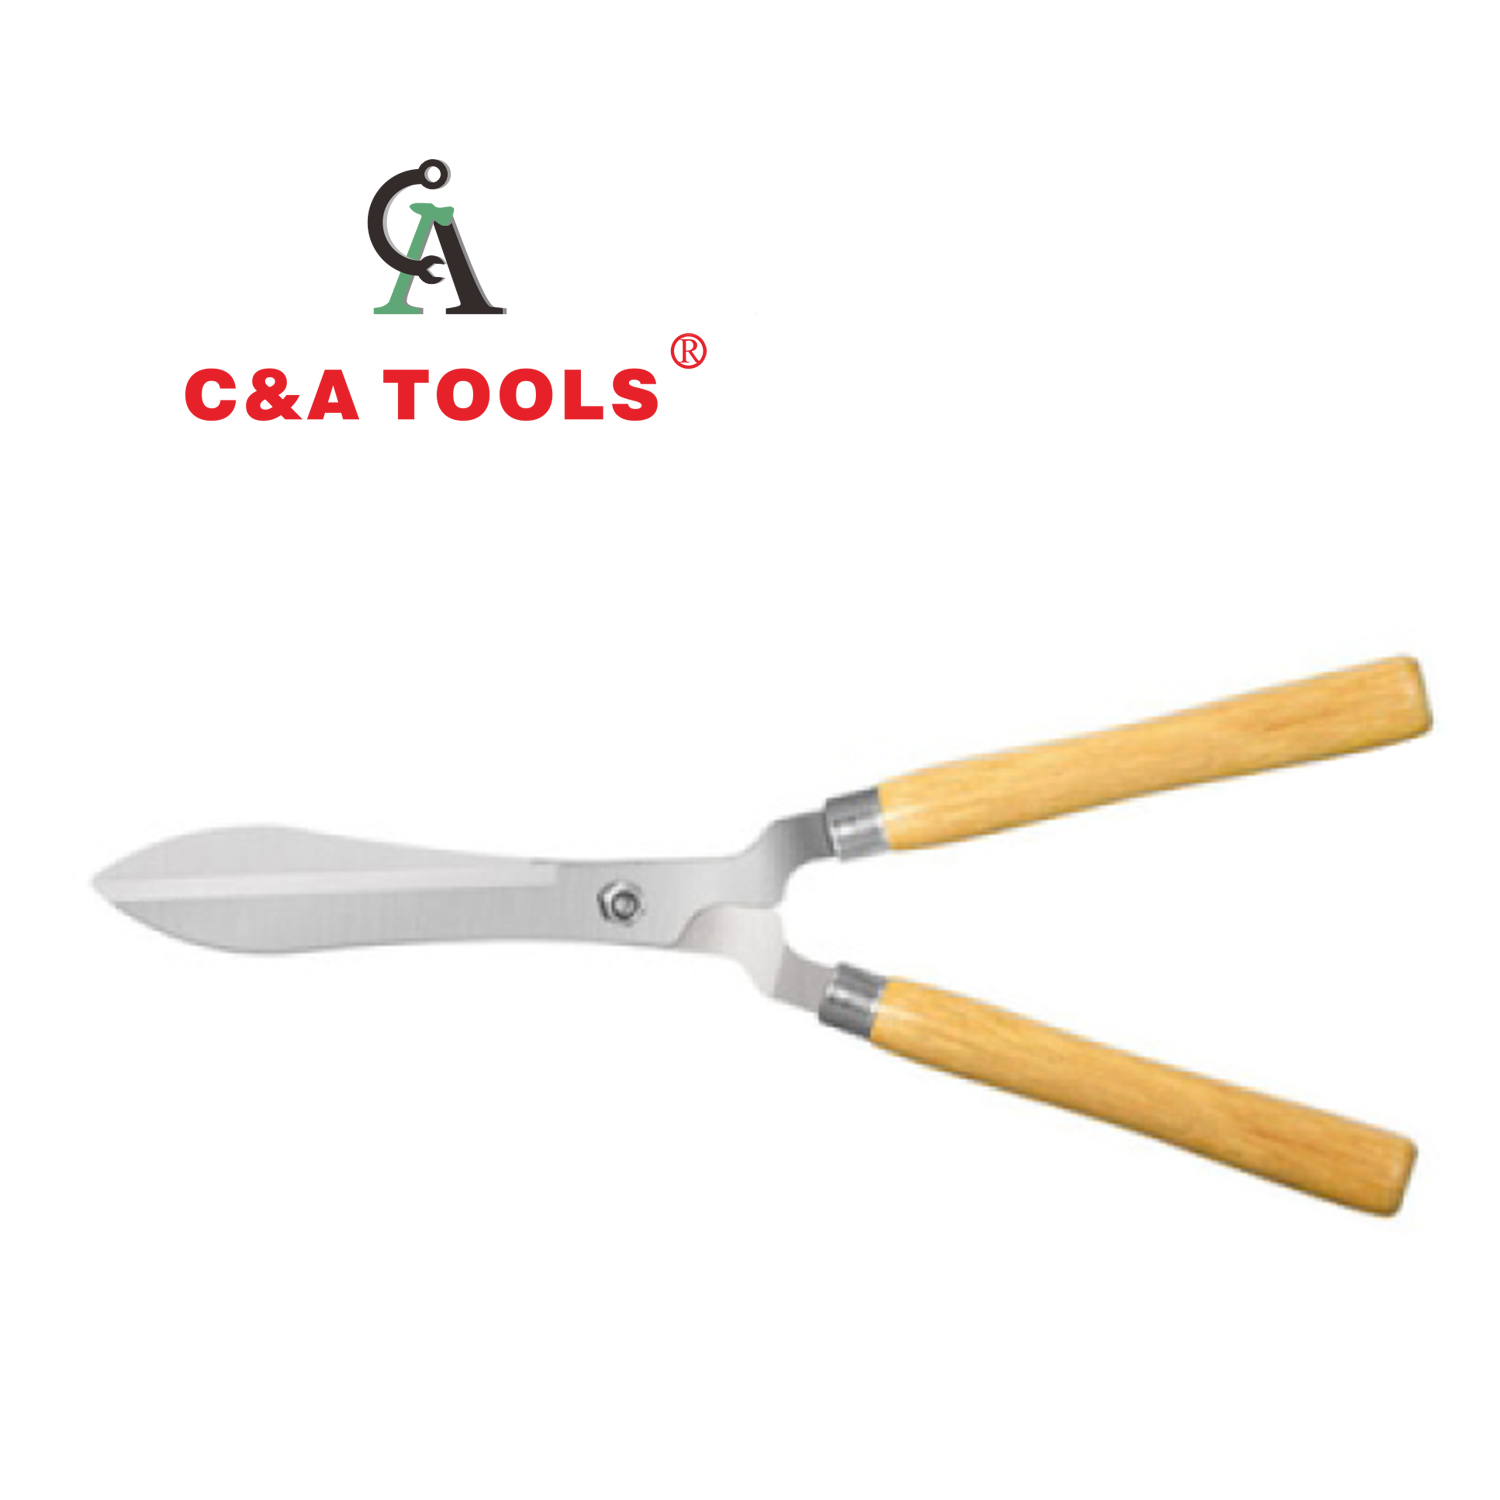 Wooden Handle Hedge Shear